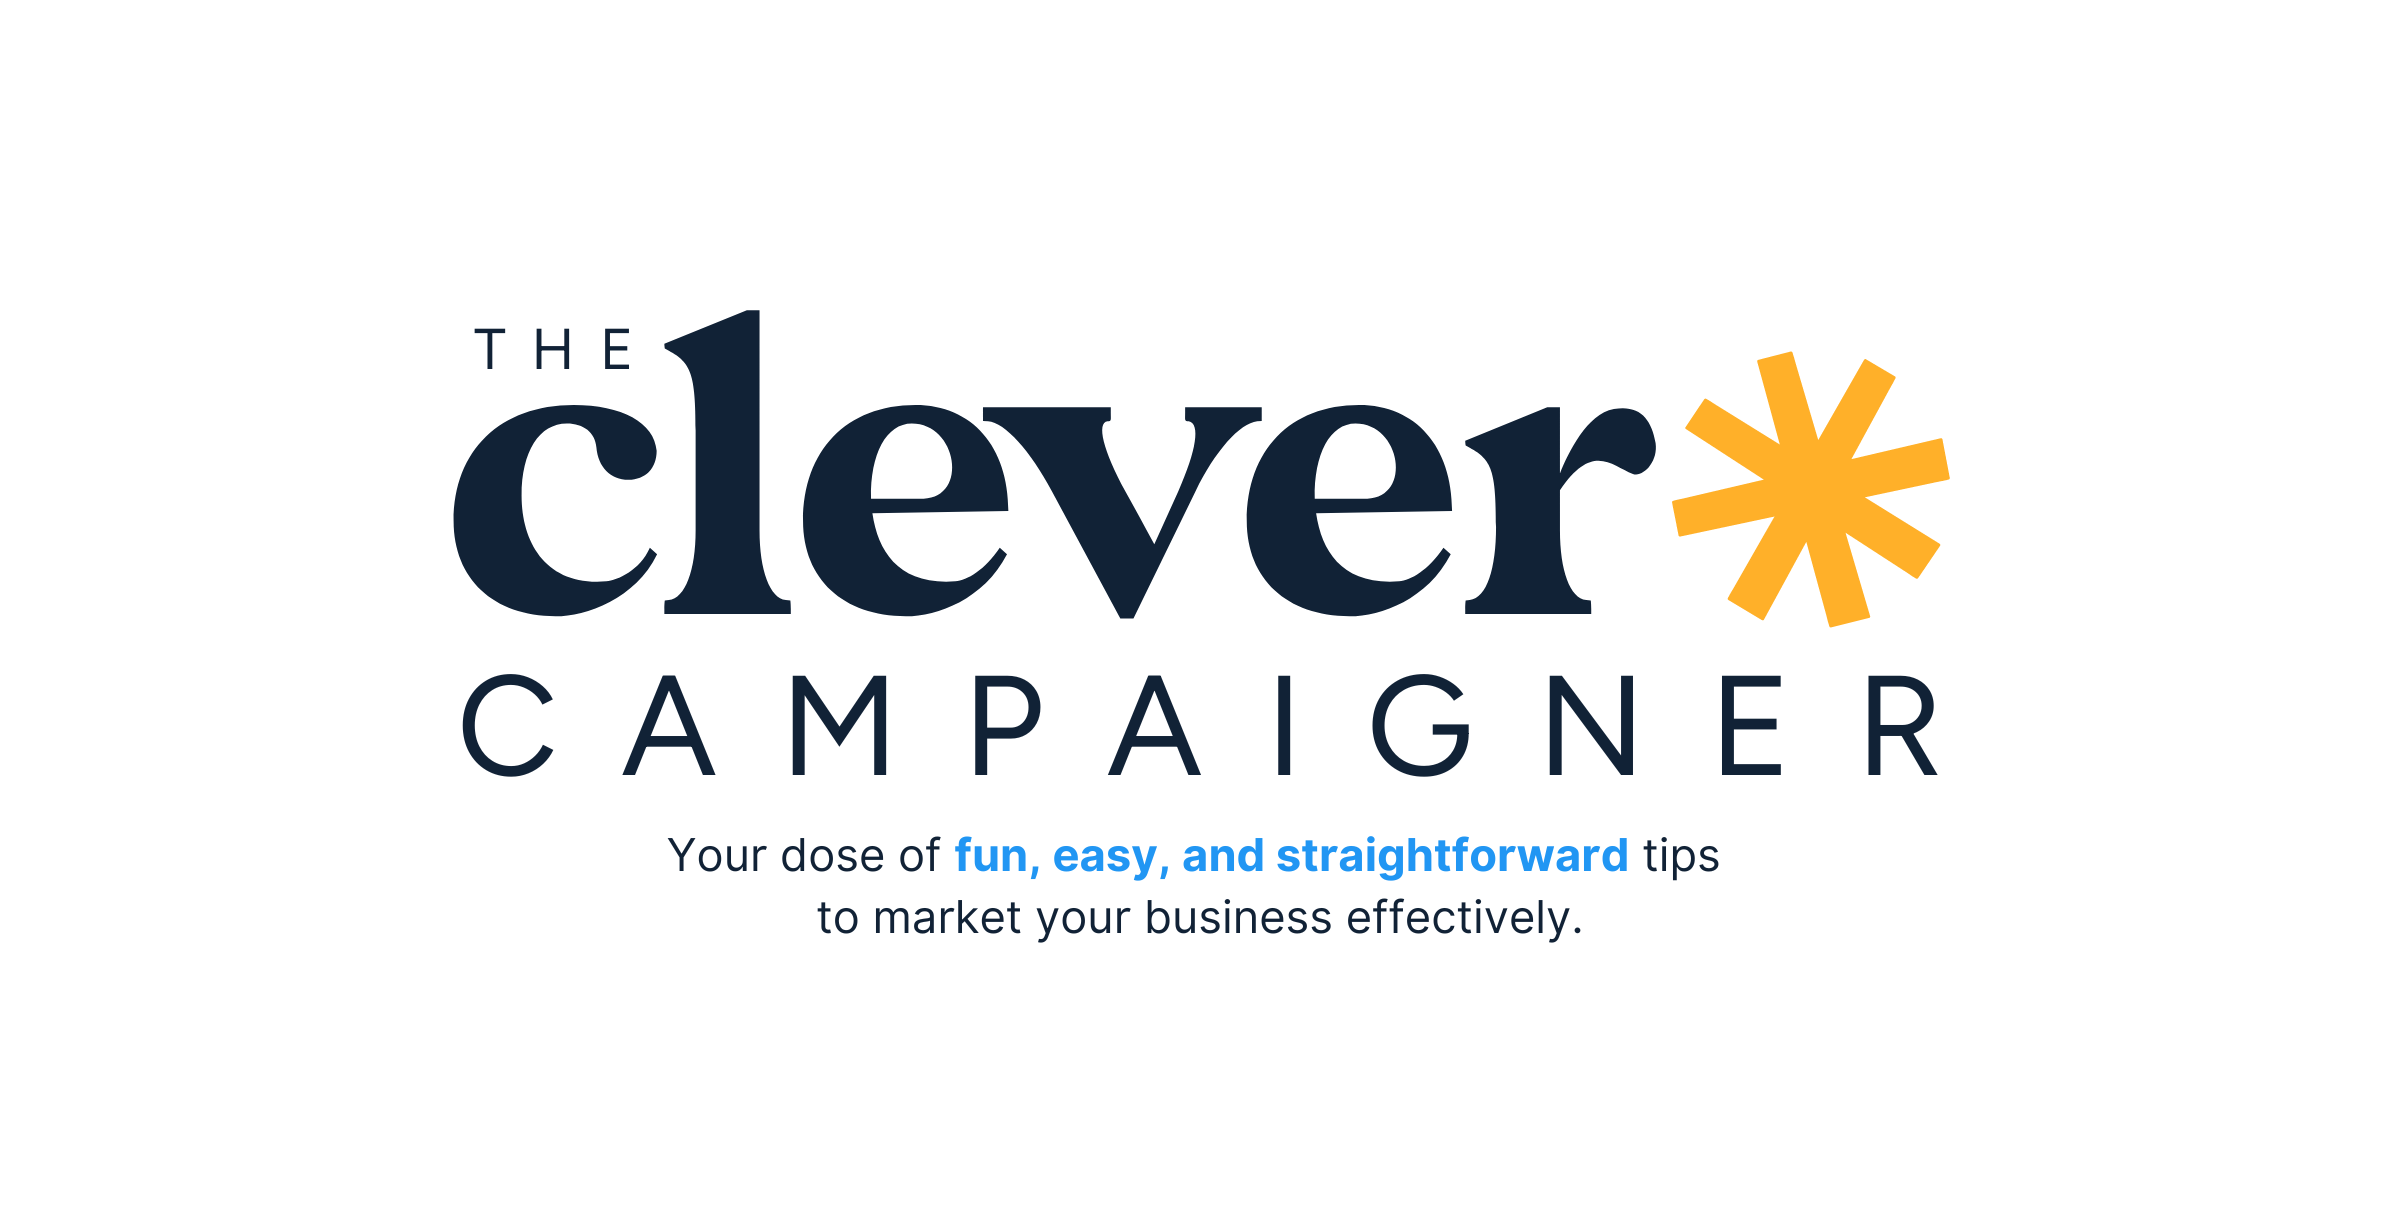 the clever campaigner your dose of straightforward tips to market your business effectively